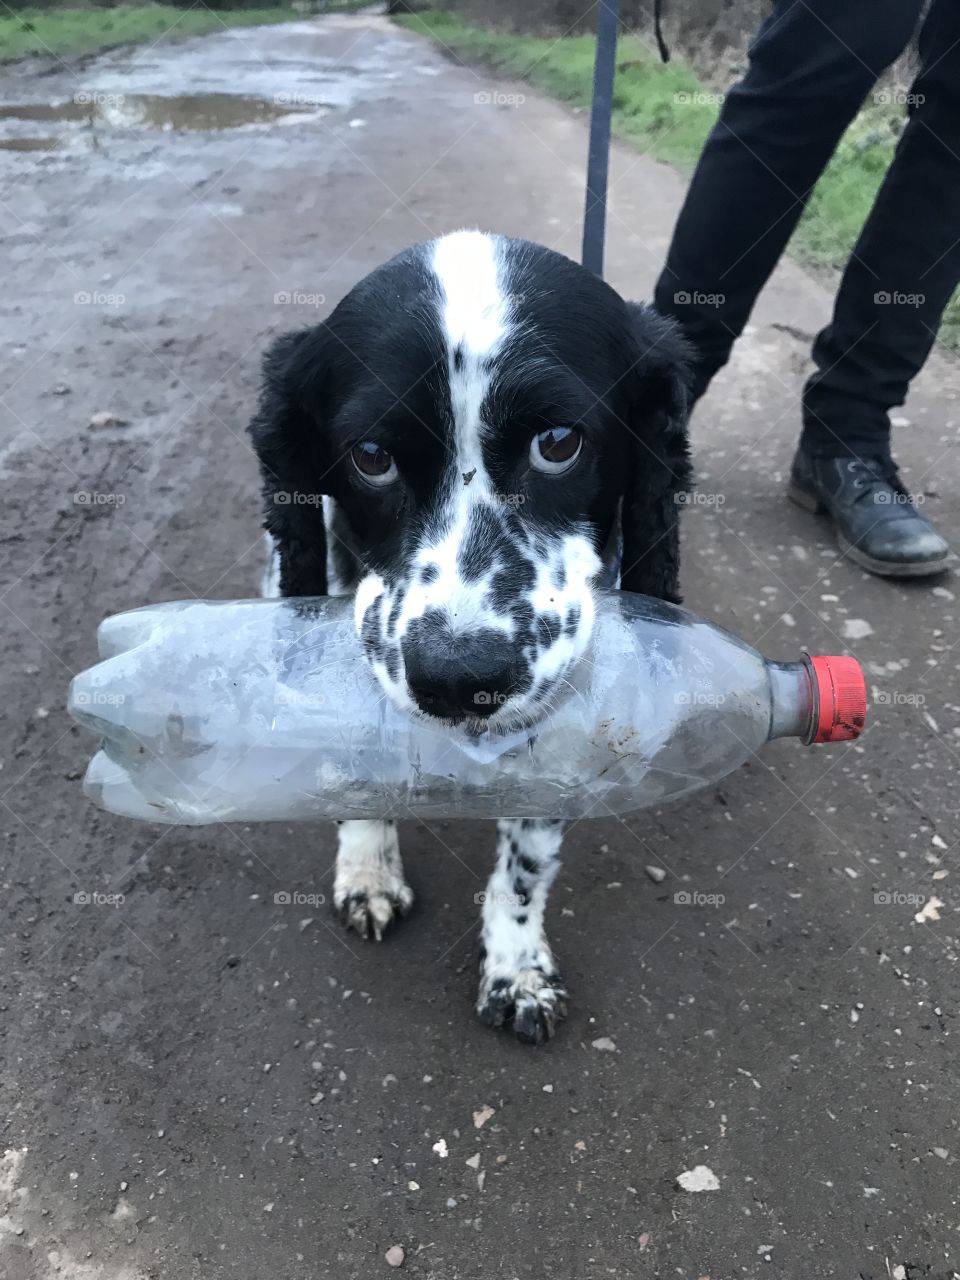 Dog Carrying Water Bottle - Another picture of Jasper carrying a ware bottle on his walks 